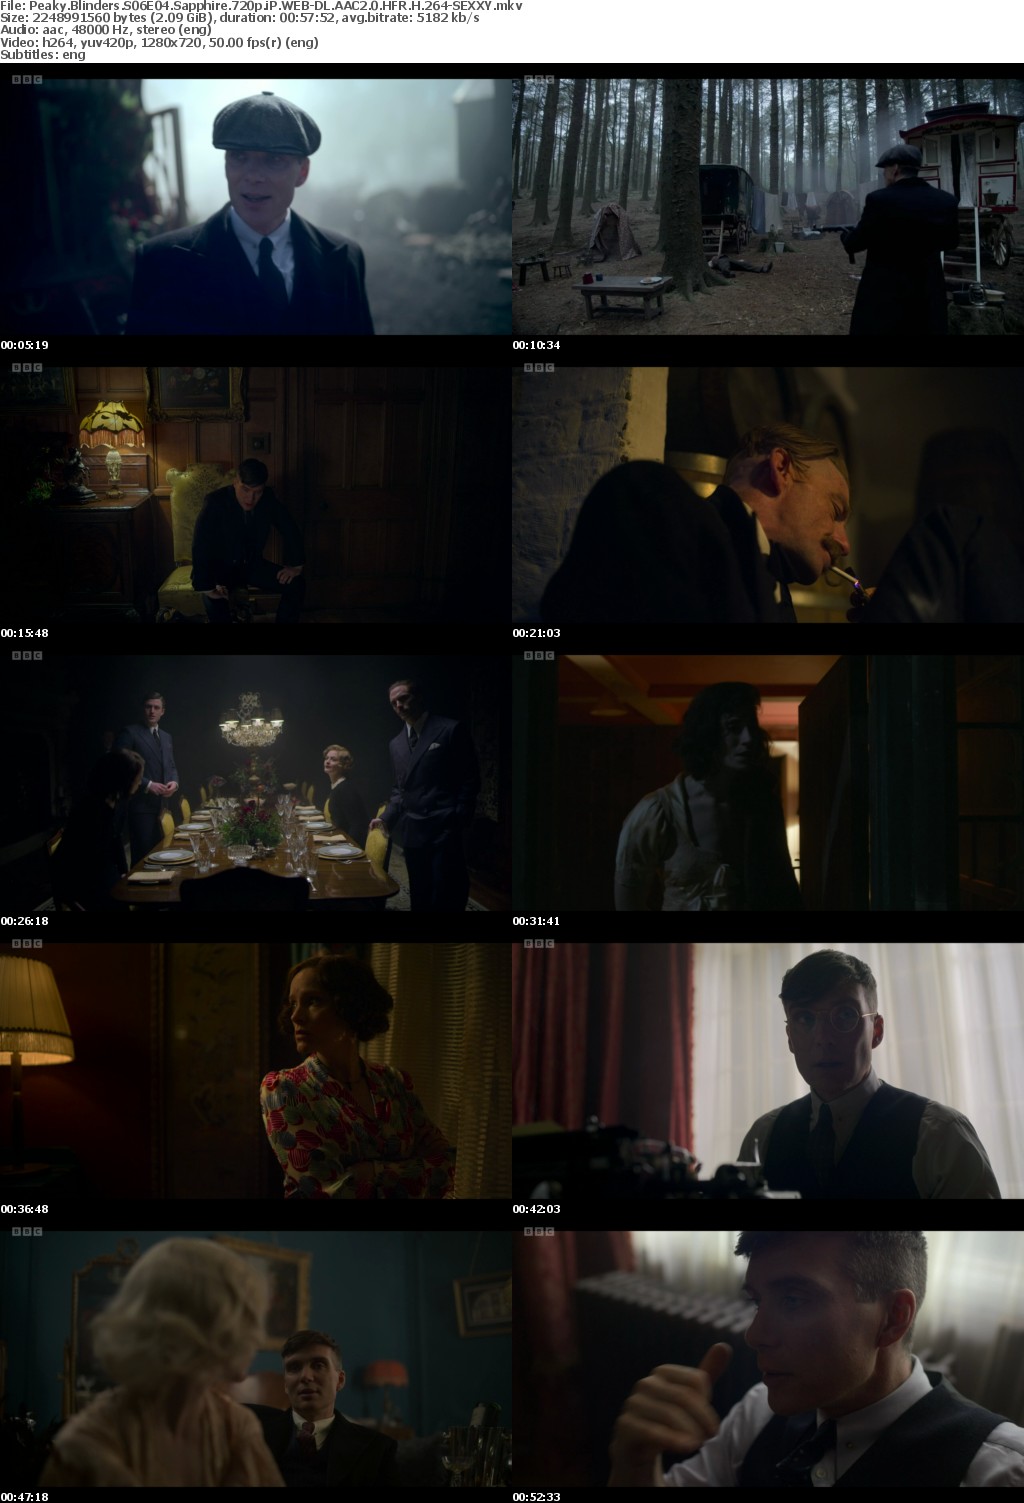 Peaky Blinders S06E04 Sapphire 720p iP WEB-DL AAC2 0 HFR H 264-SEXXY